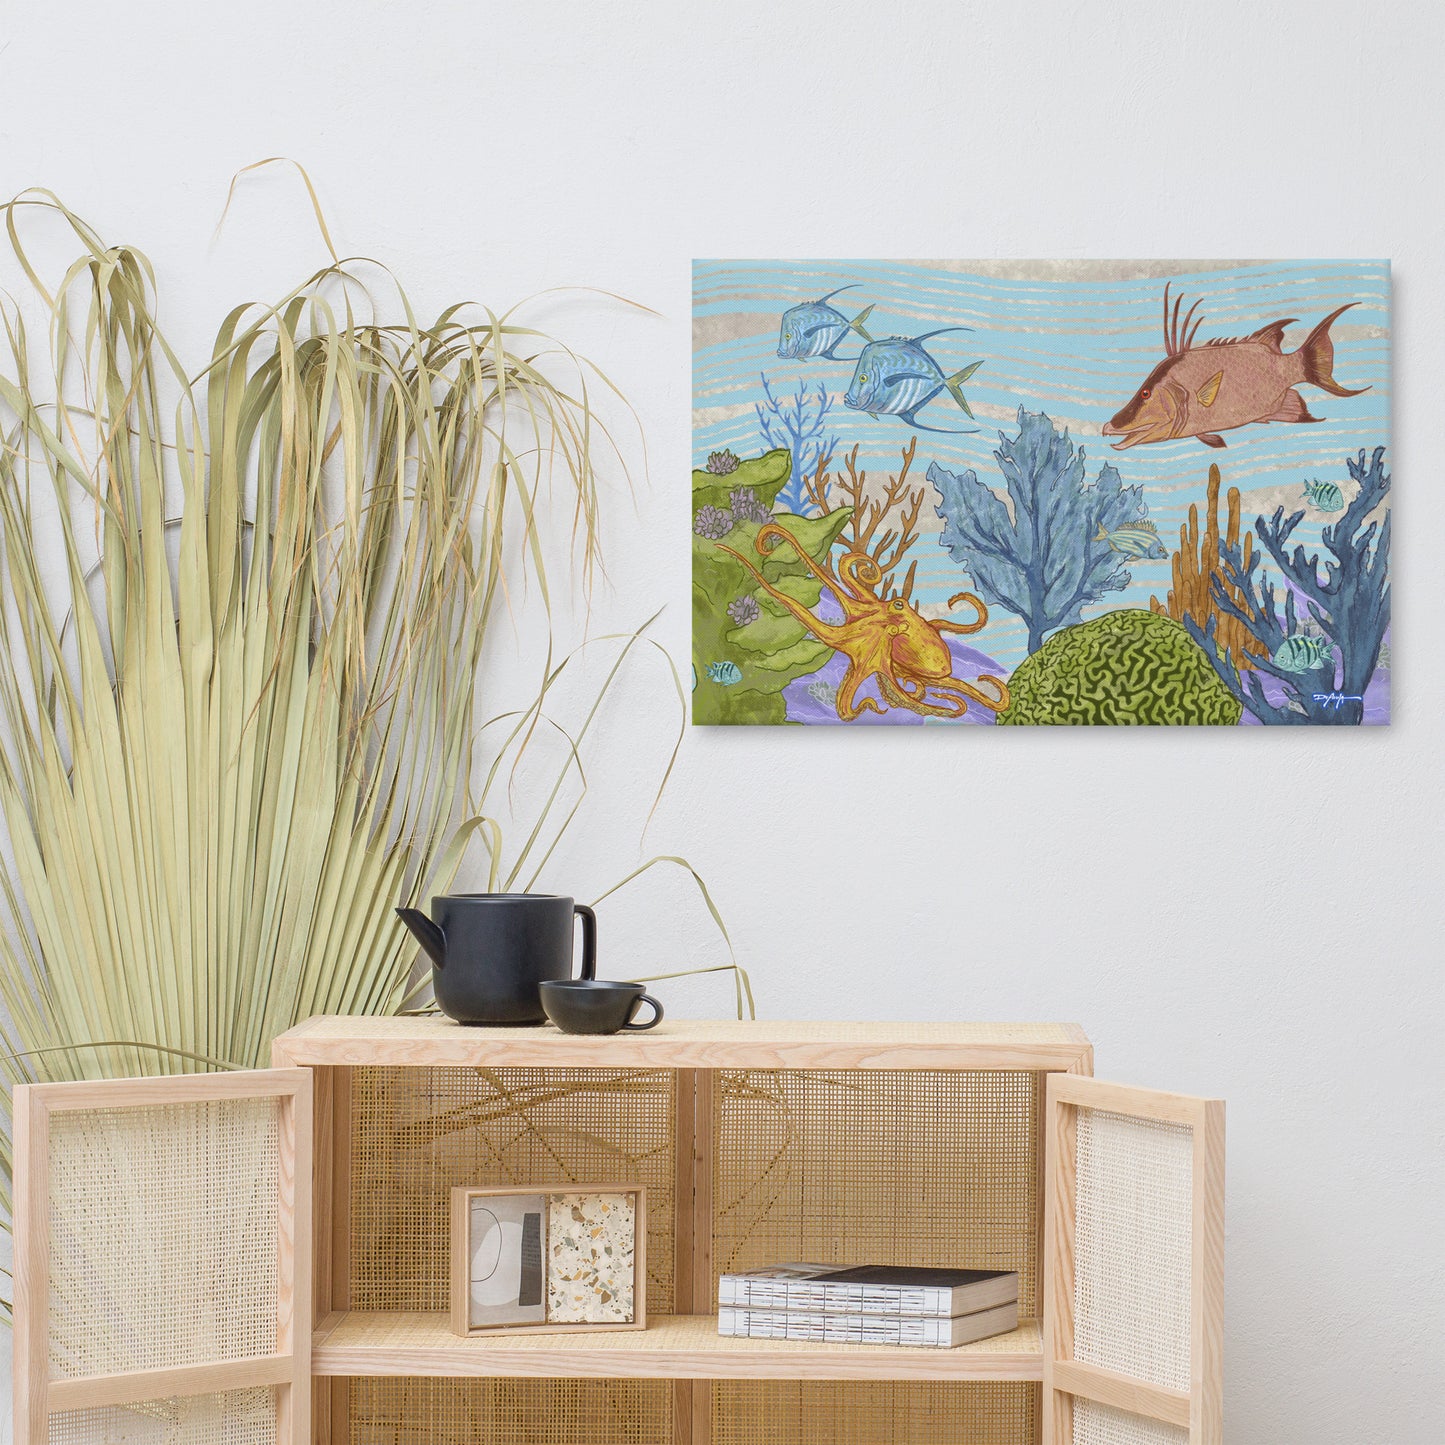 The Reef Panel 5 Hogfish Octopus Fine Art Canvas